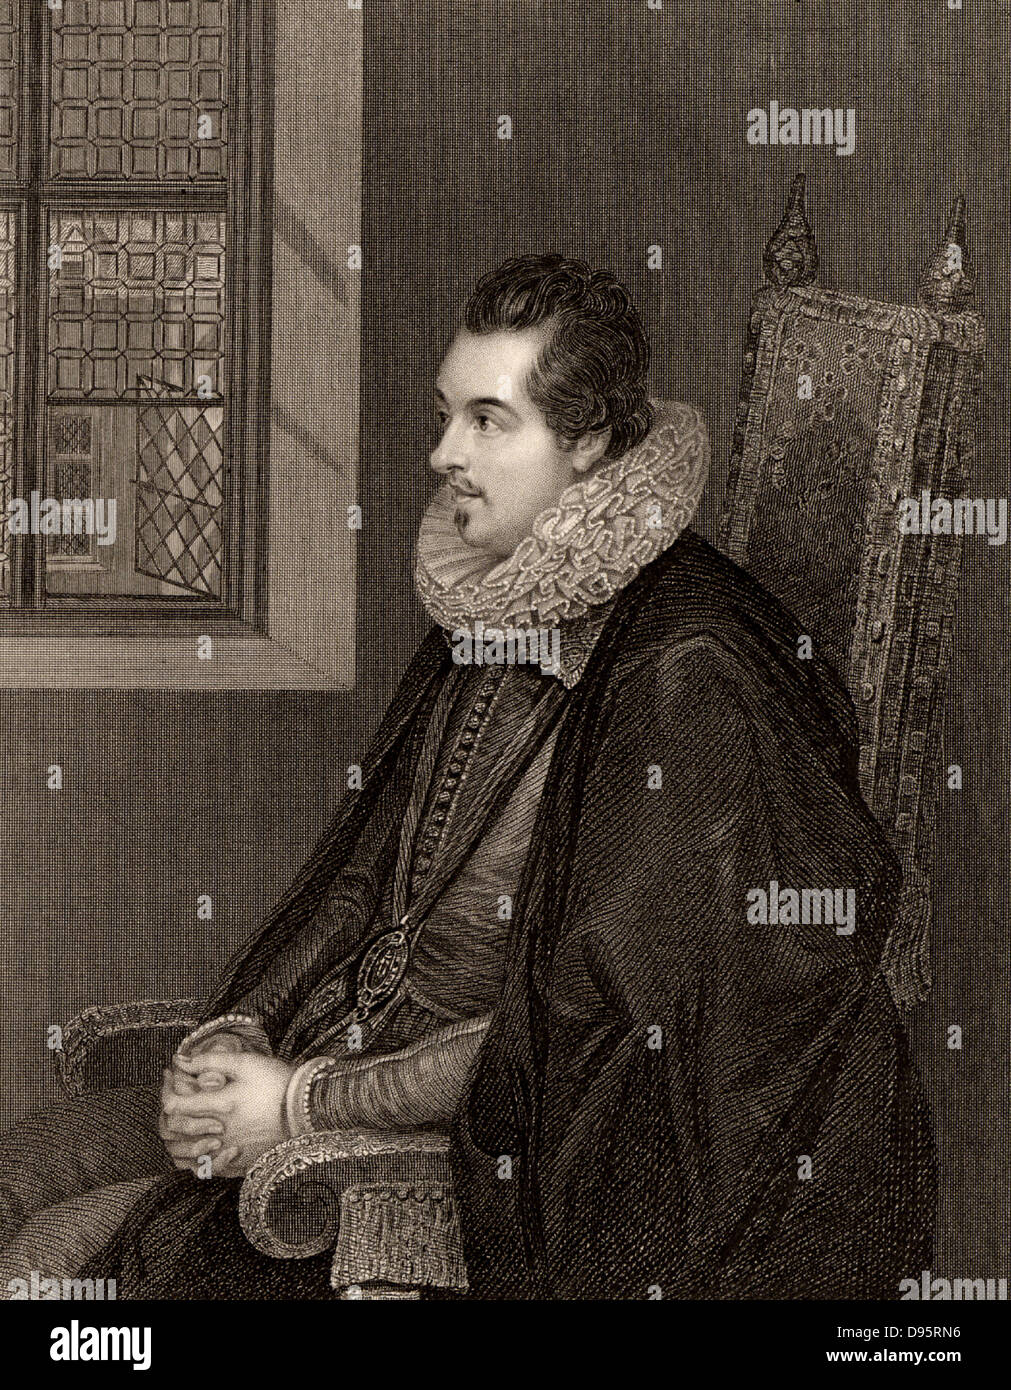 Charles Blount, Earl of Devonshire, 8th Baron Mountjoy (1563-1606) English courtier and soldier.  Engraving. Stock Photo